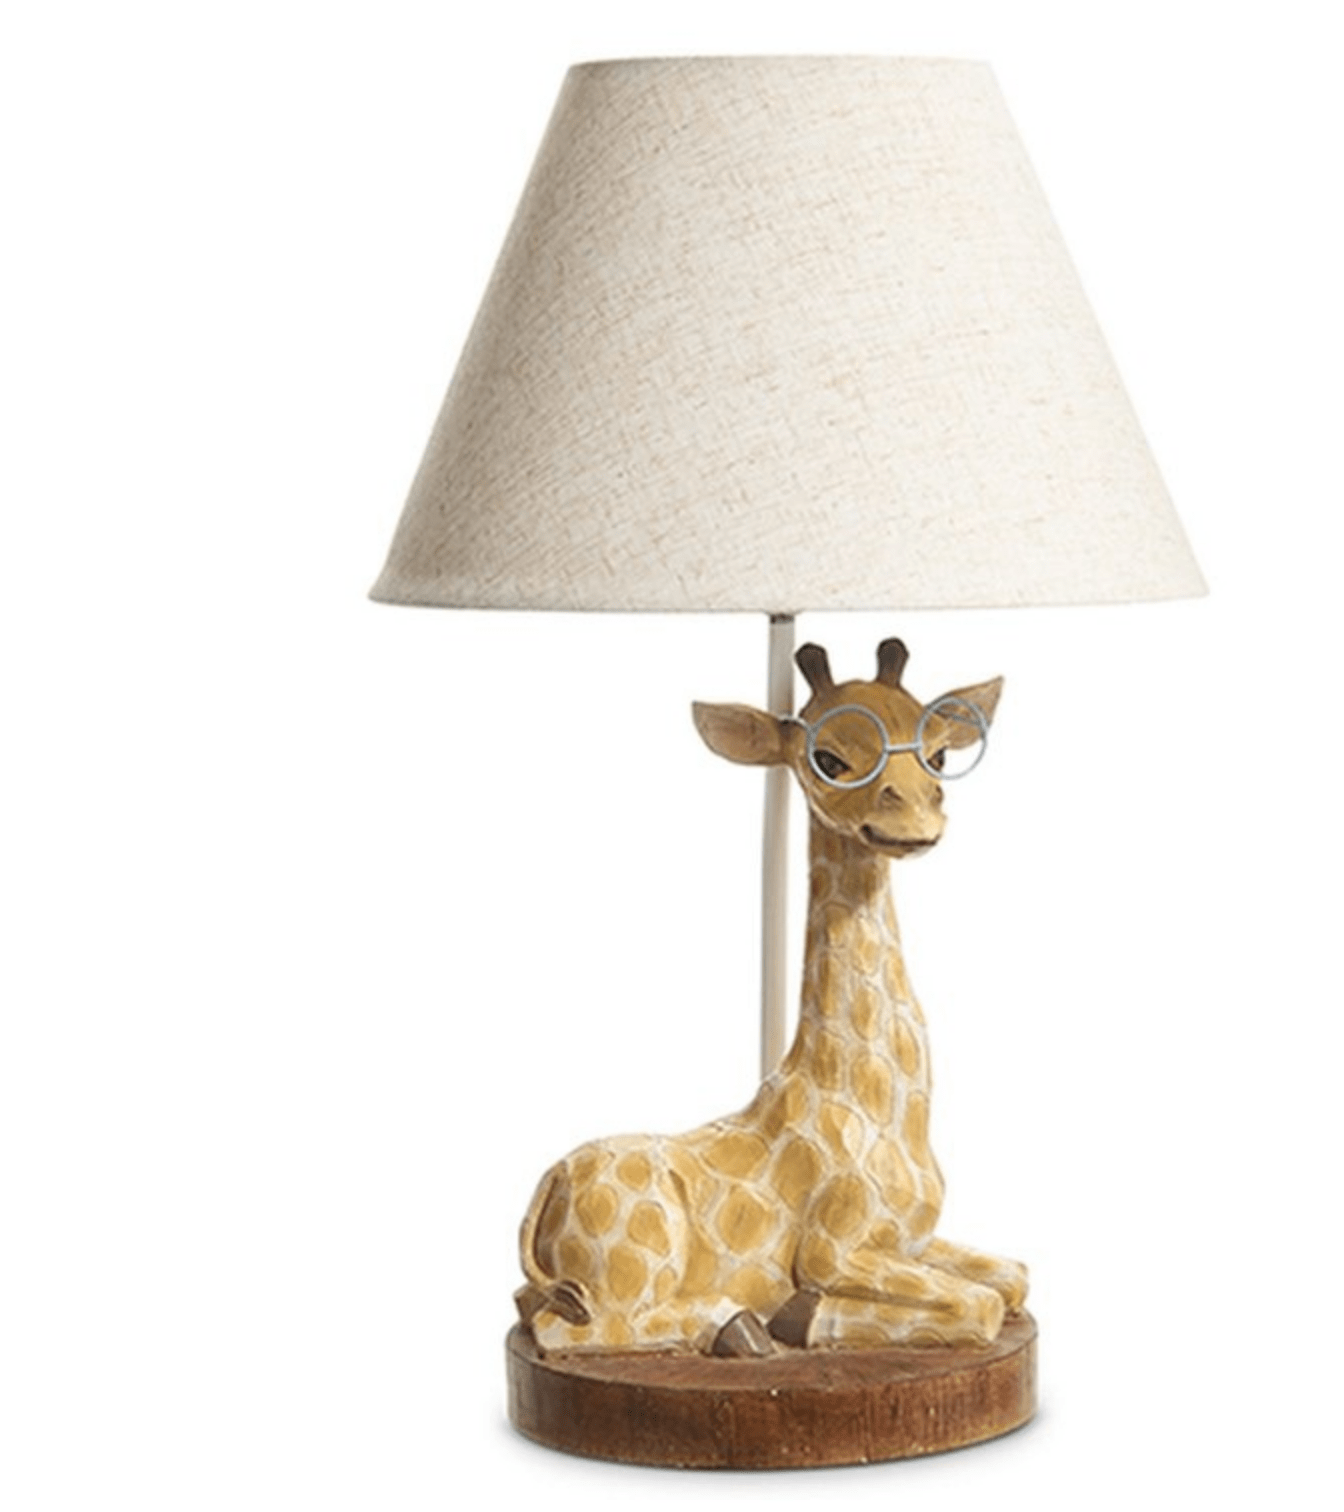 18" Giraffe with Glasses Lamp - Ruffled Feather